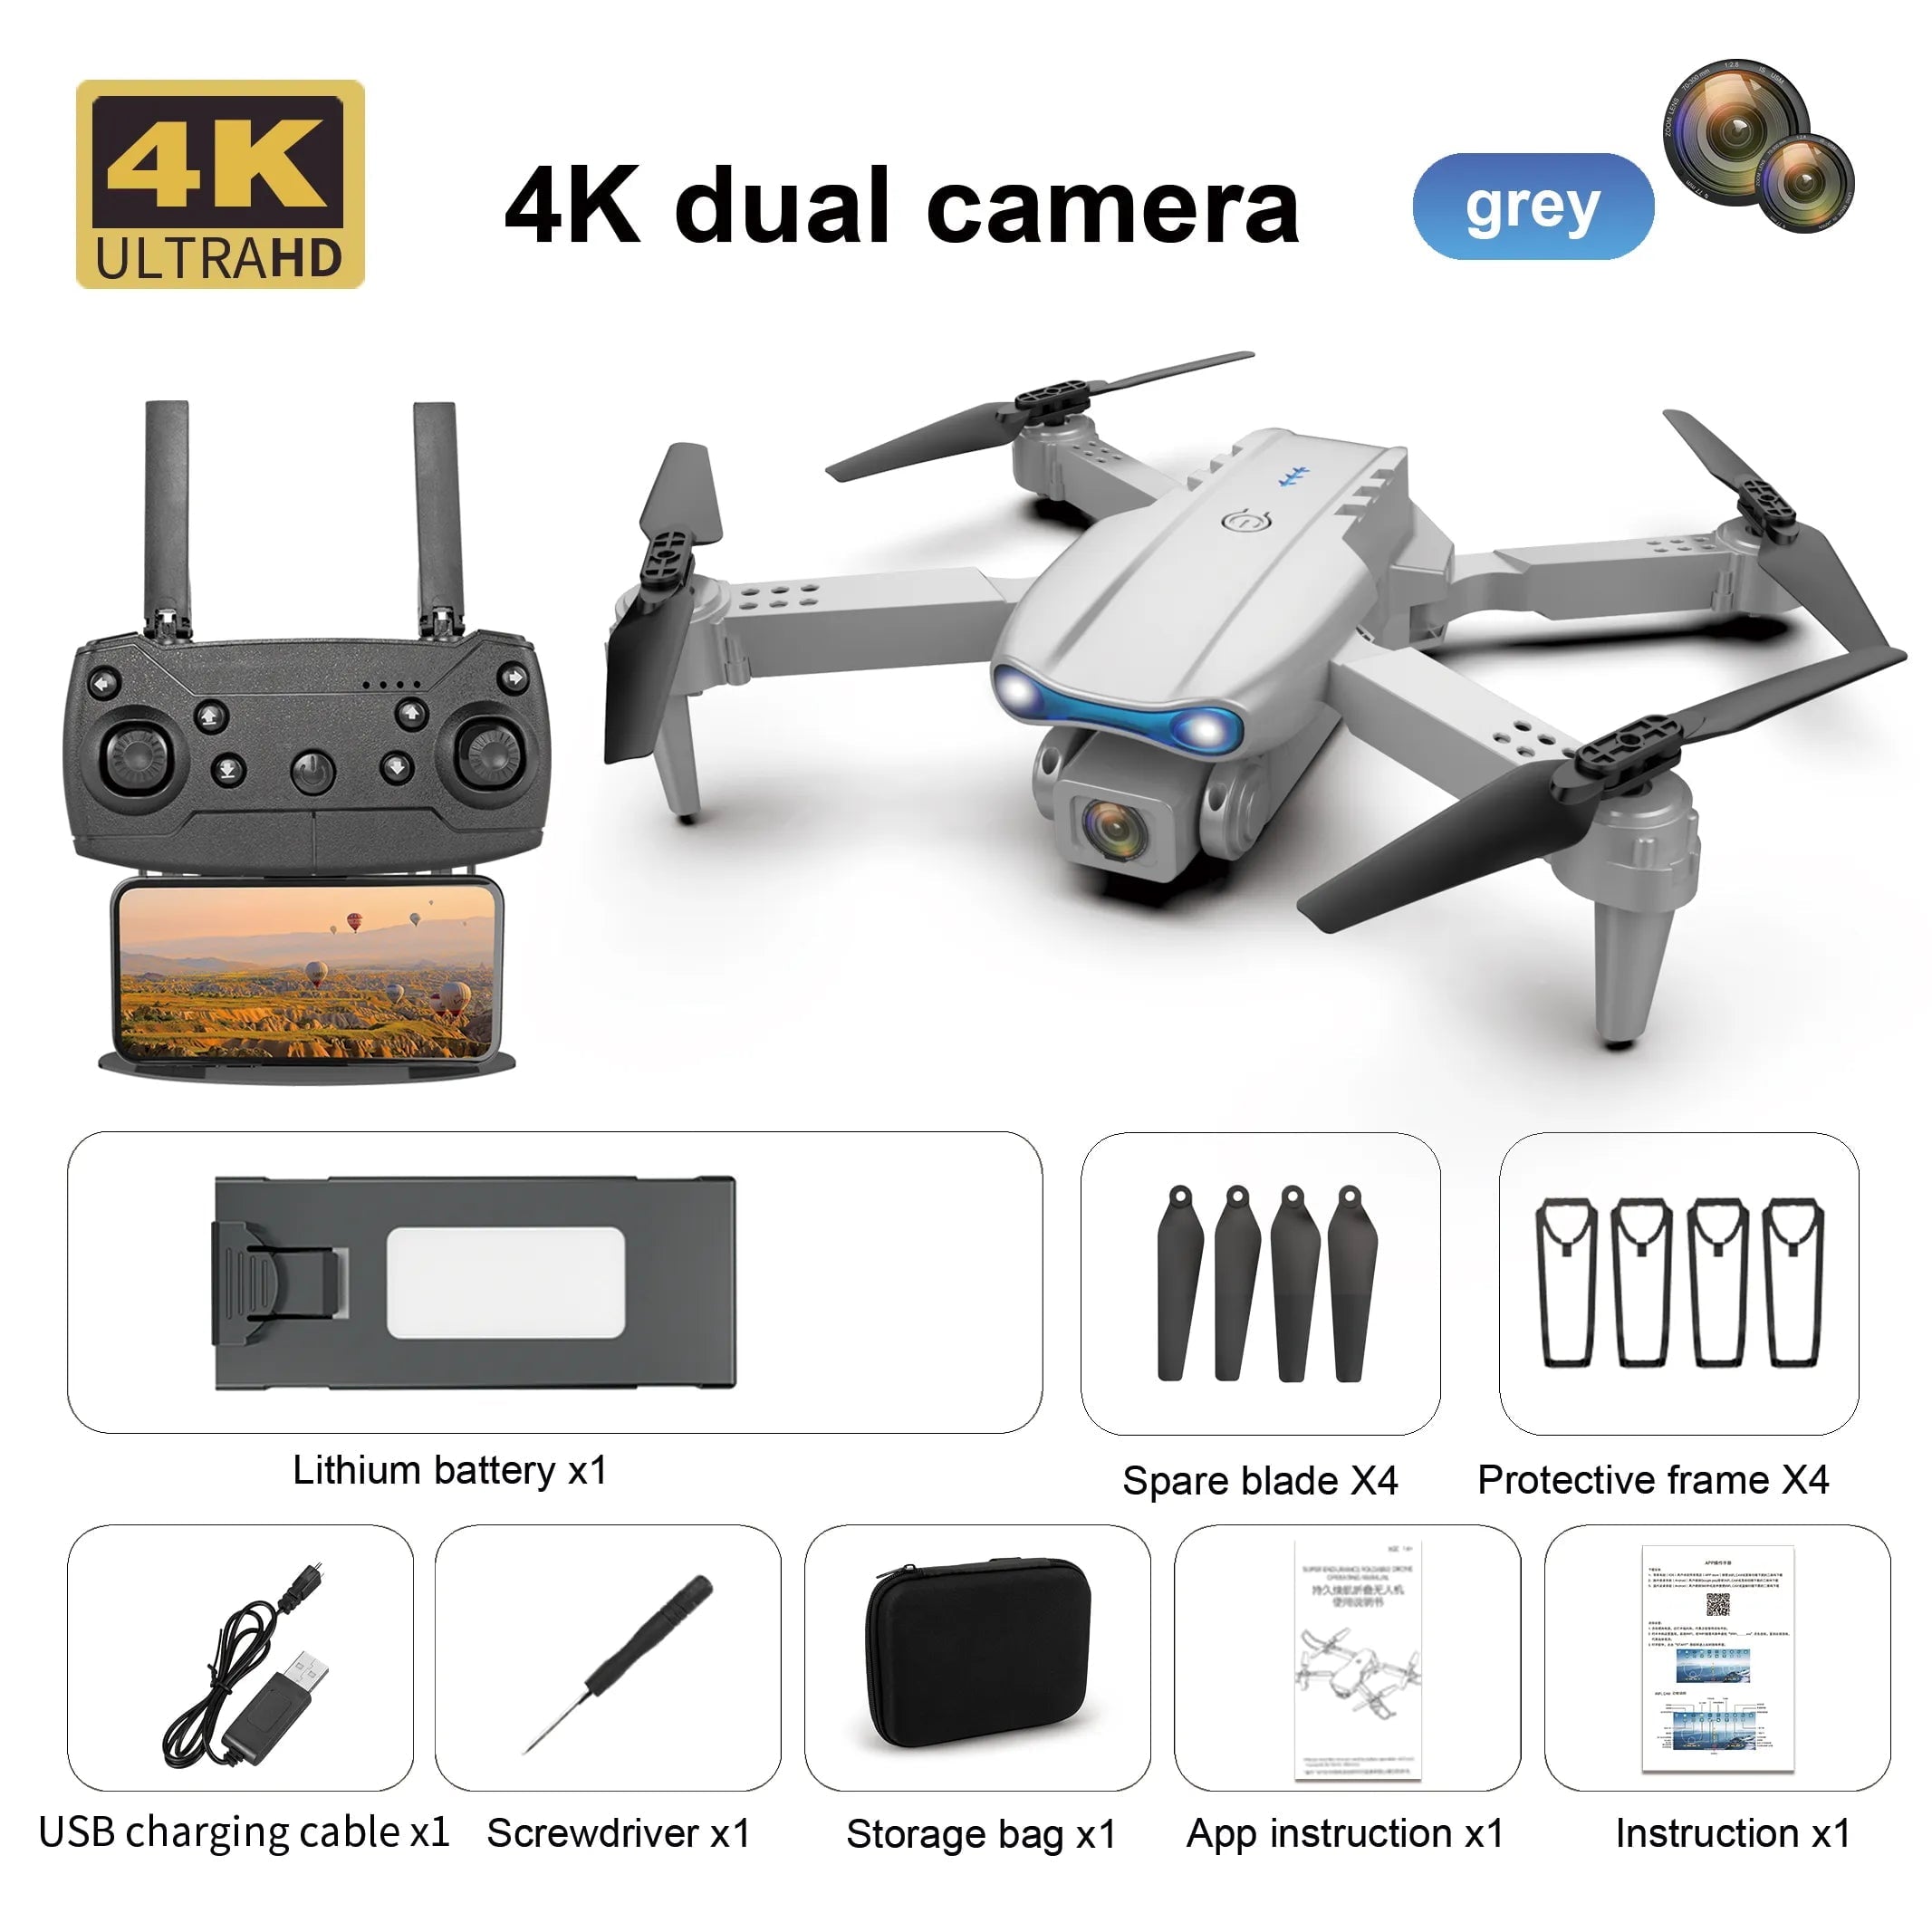 K3 E99 Pro Mini Drone HD Camera - WIFI FPV - Three-sided Obstacle Avoidance - Foldable RC Quadcopter 4K-Dual - Grey